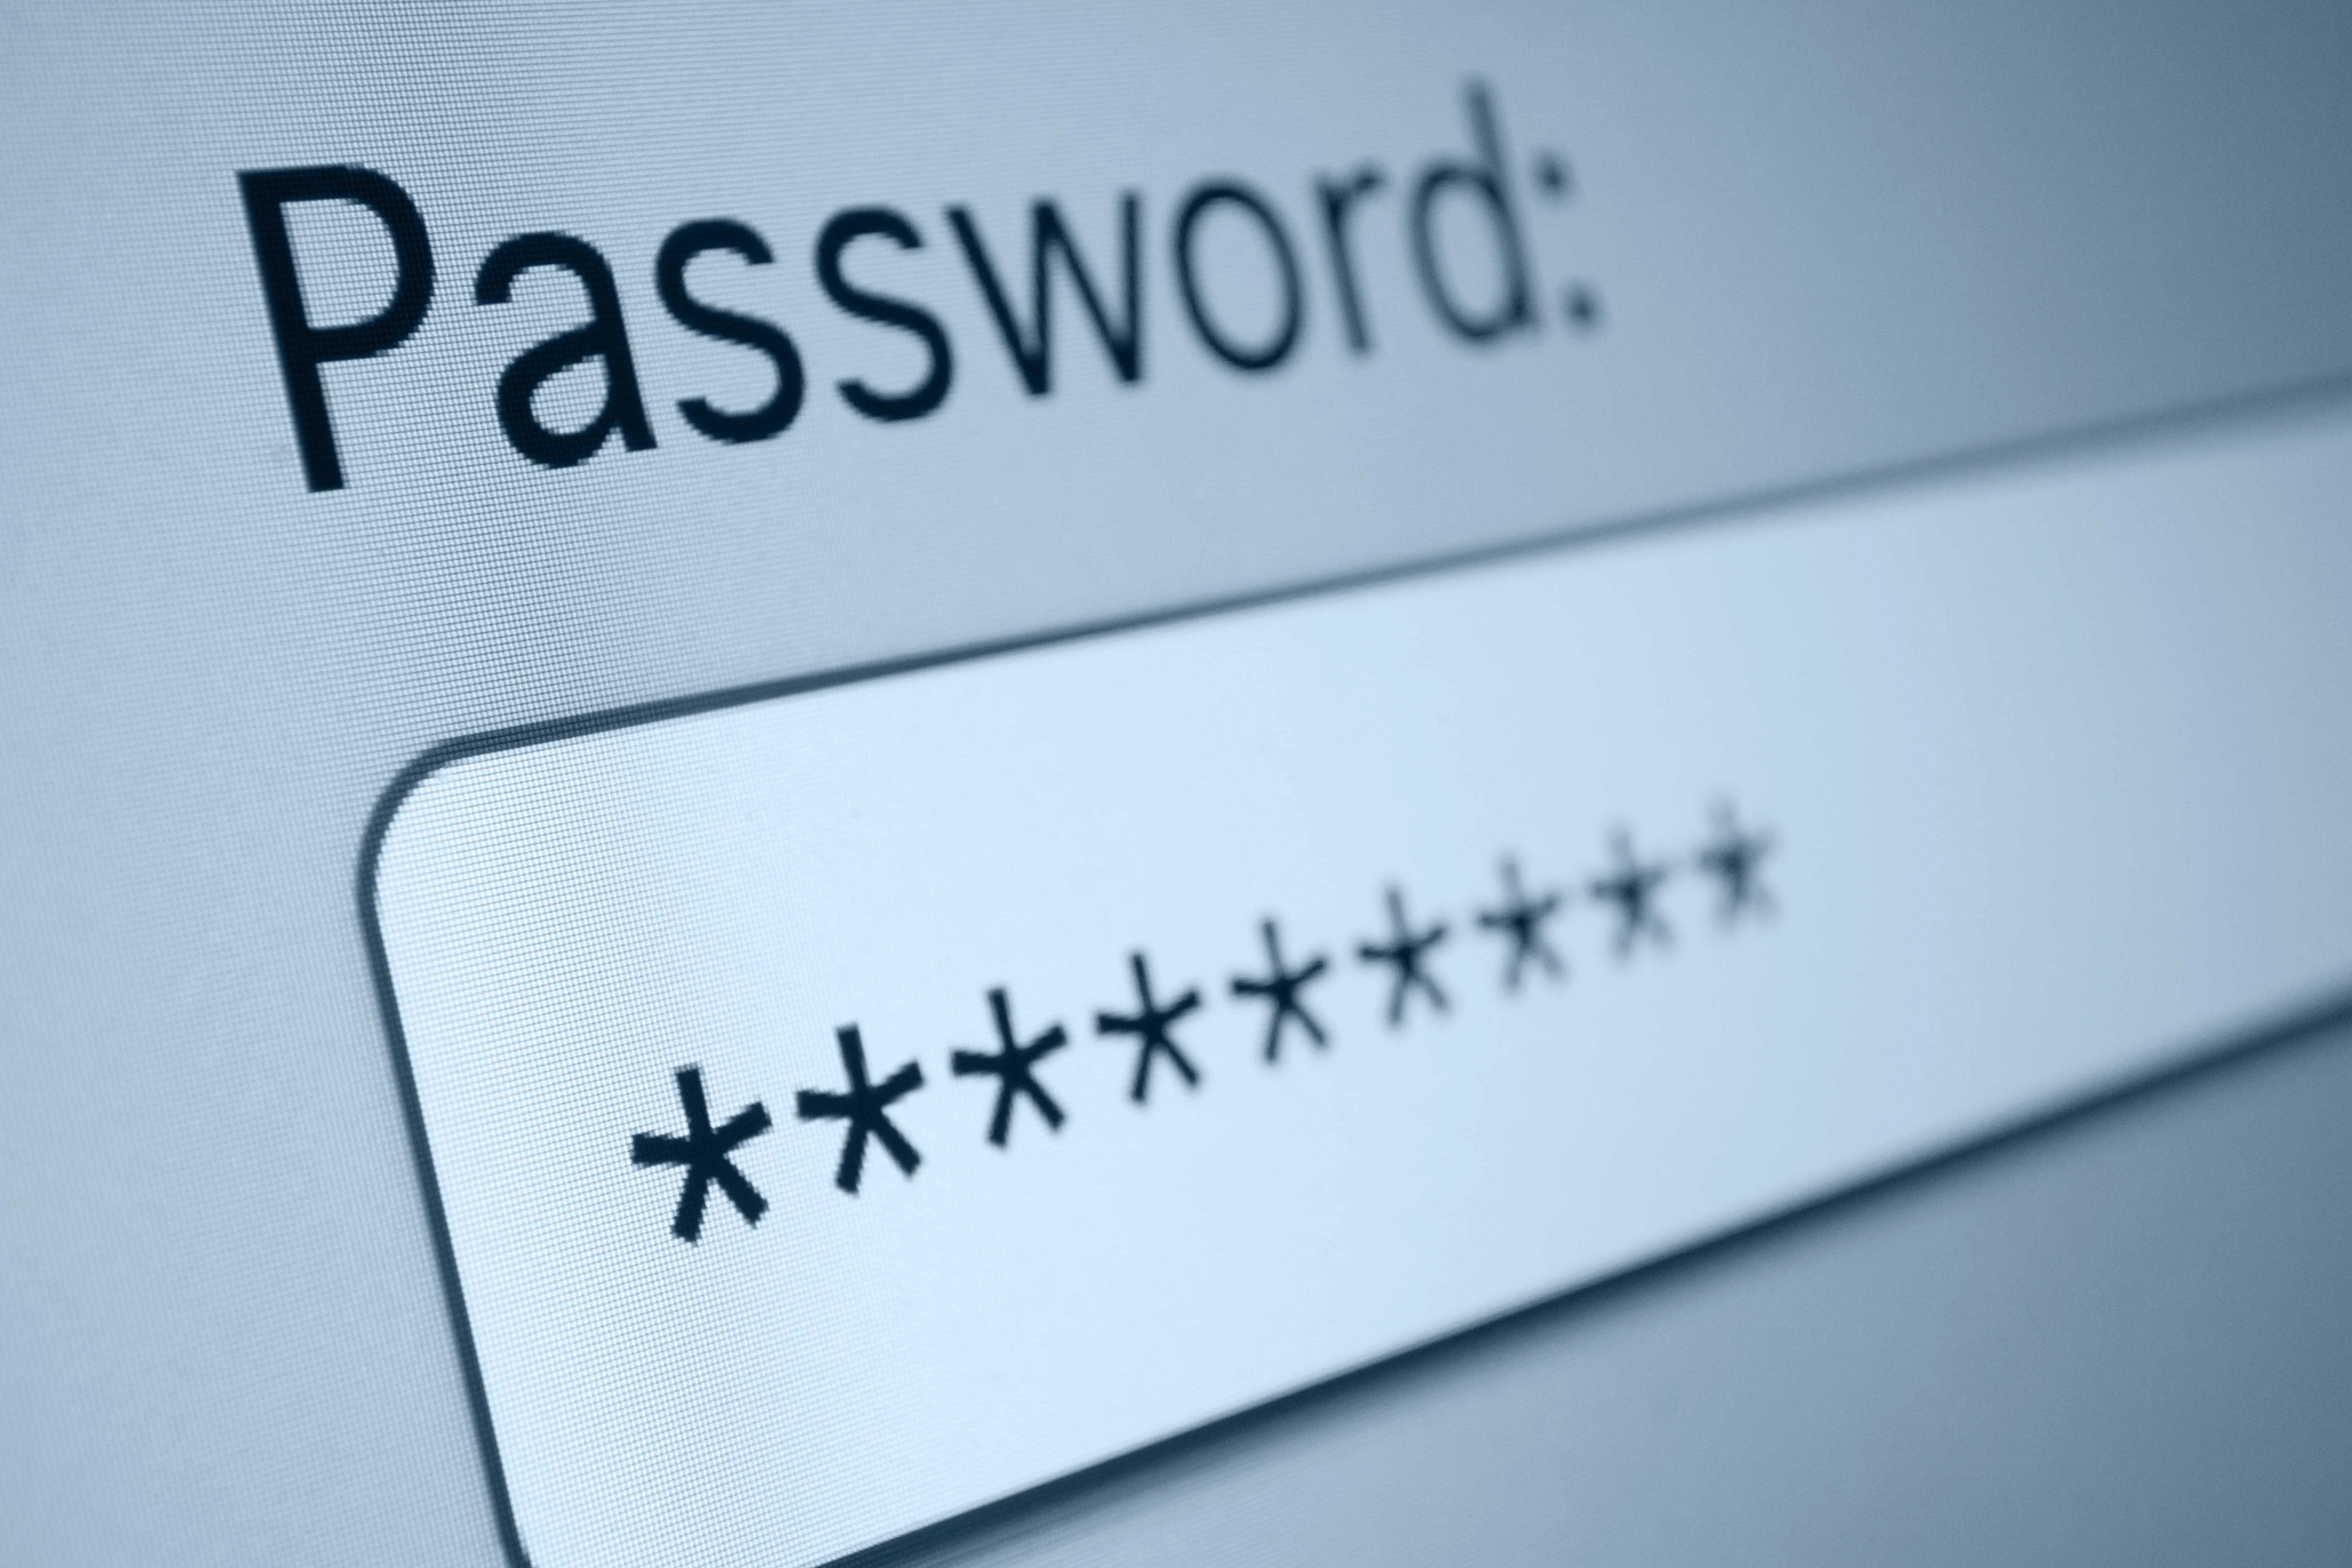 Top 10 most popular passwords of 2022 revealed